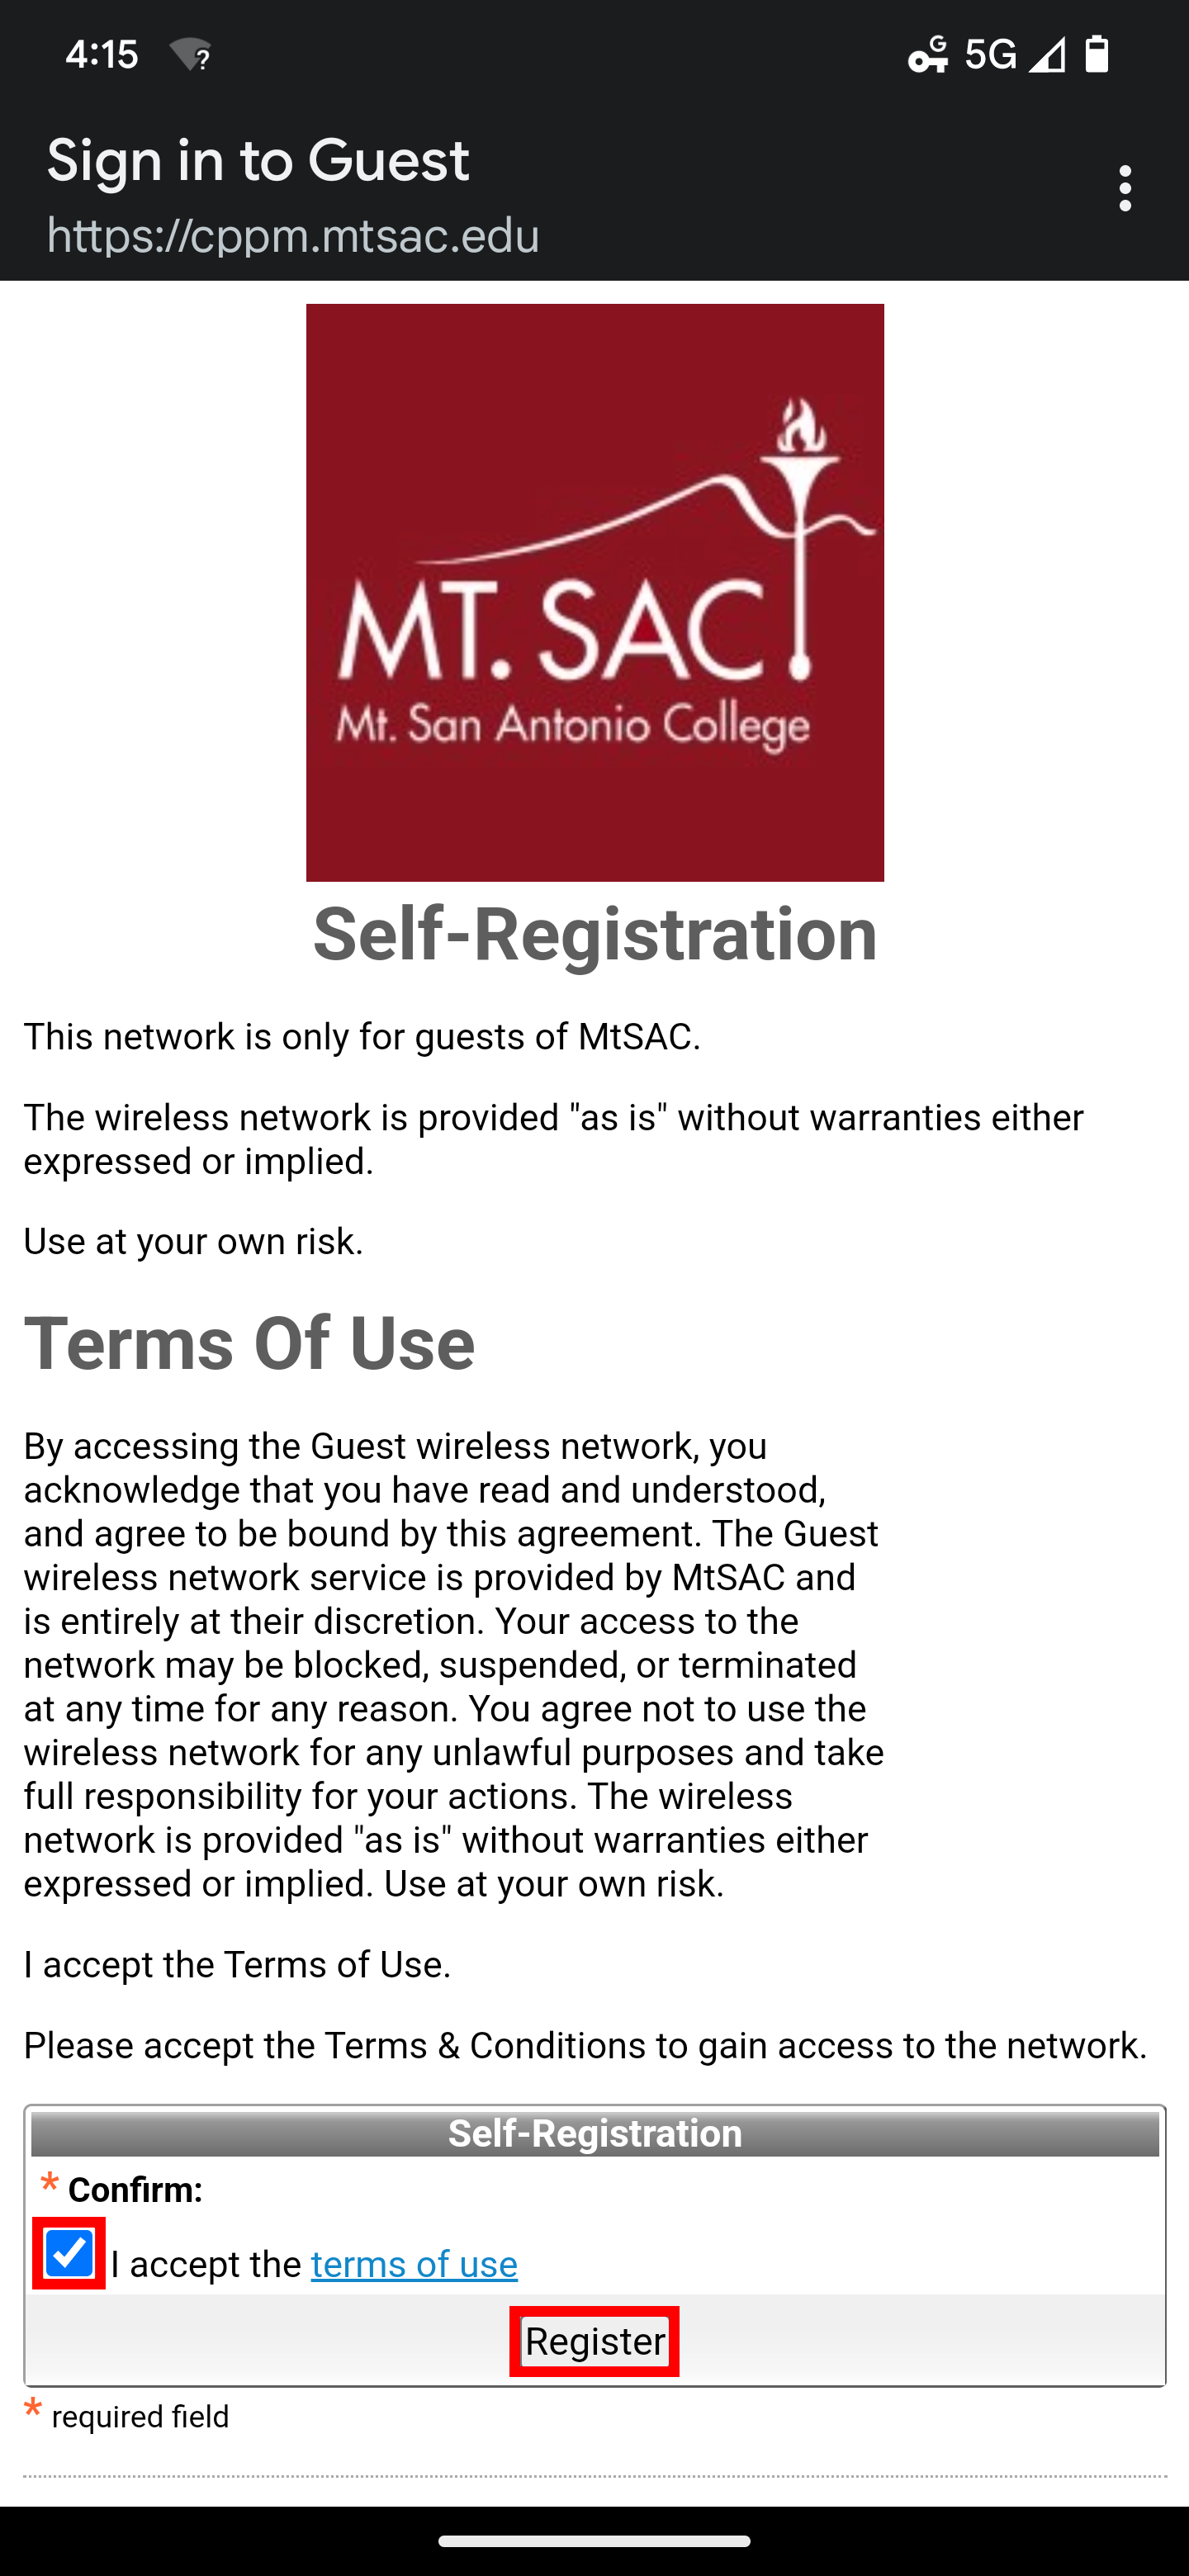 Android screen with the Guest network Terms of Use displayed. The Confirm checkbox and Register button are highlighted.